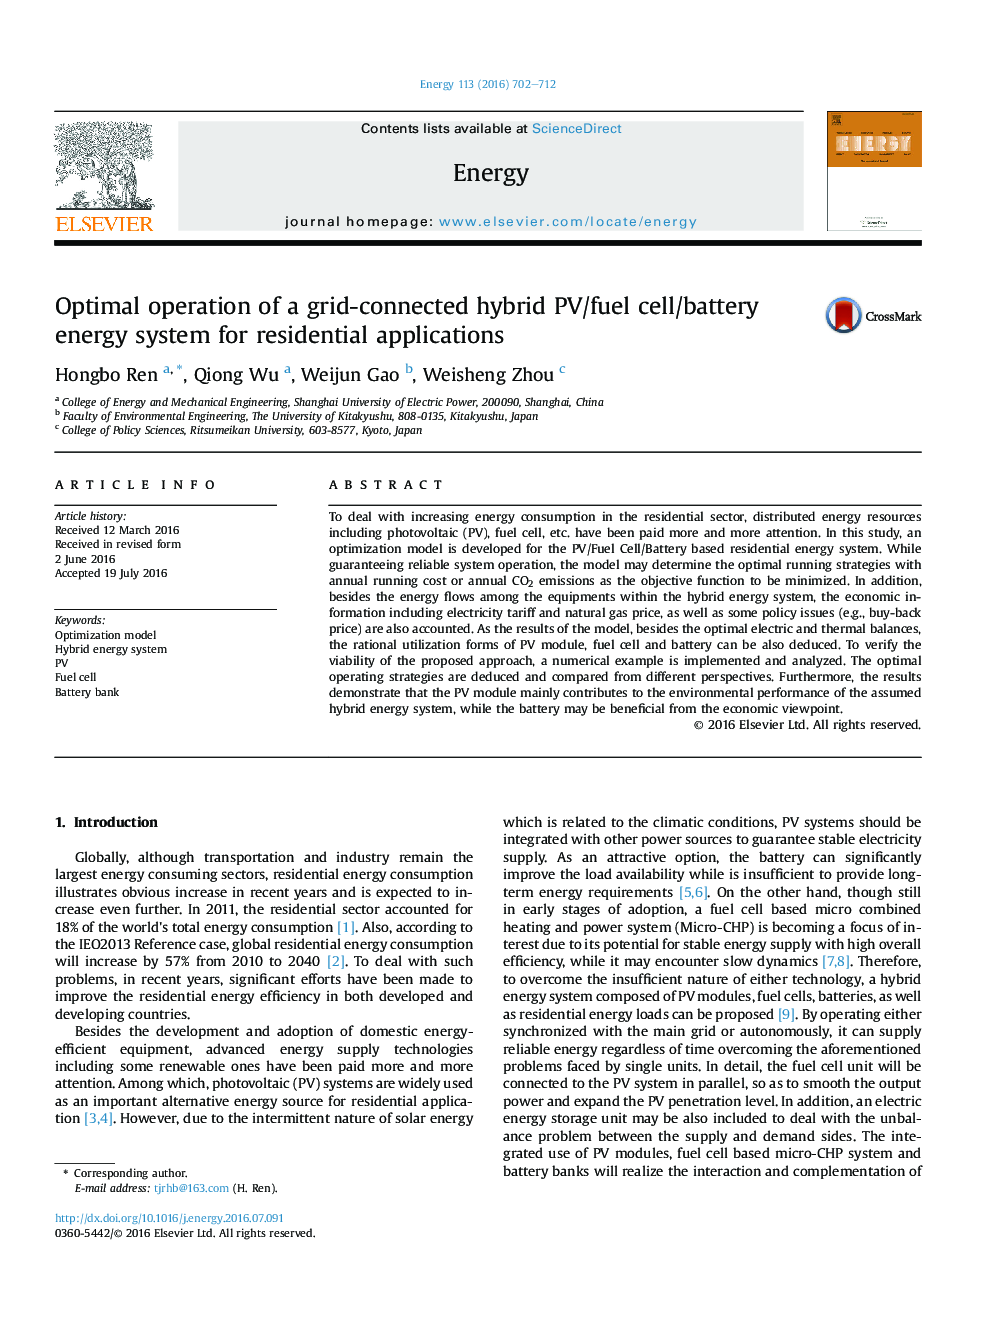 Optimal operation of a grid-connected hybrid PV/fuel cell/battery energy system for residential applications